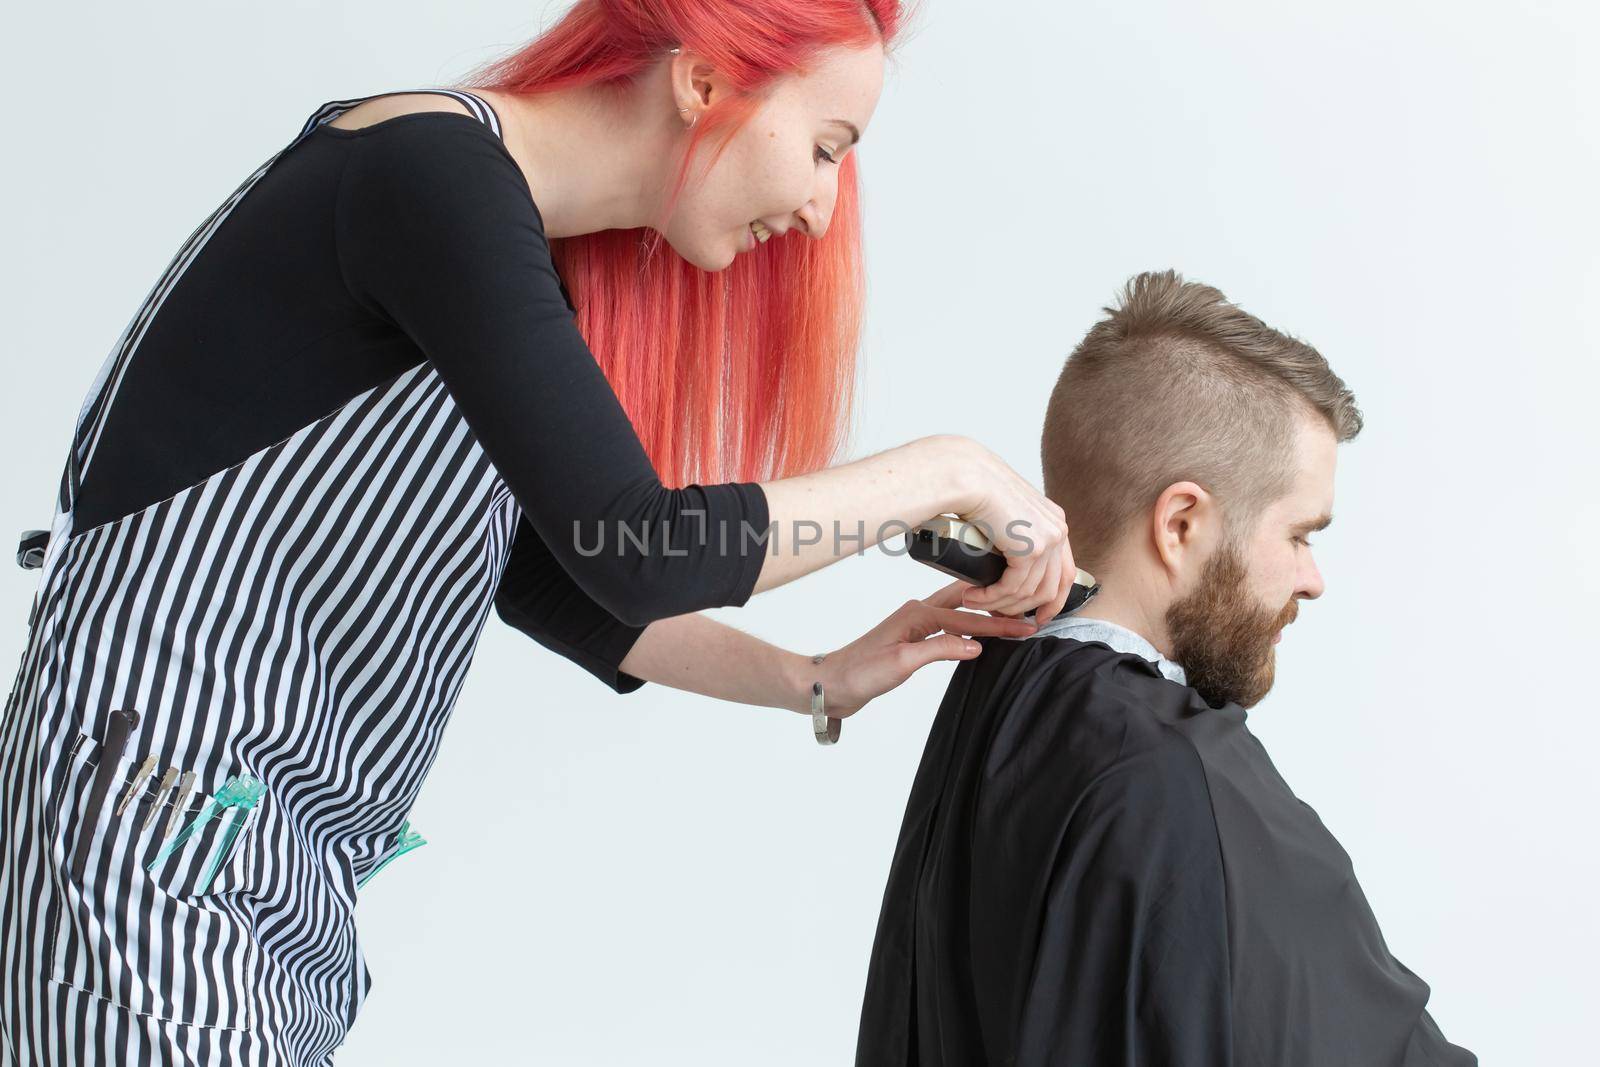 Hairdresser, stylist and barber shop concept - woman hairstylist cutting a man.